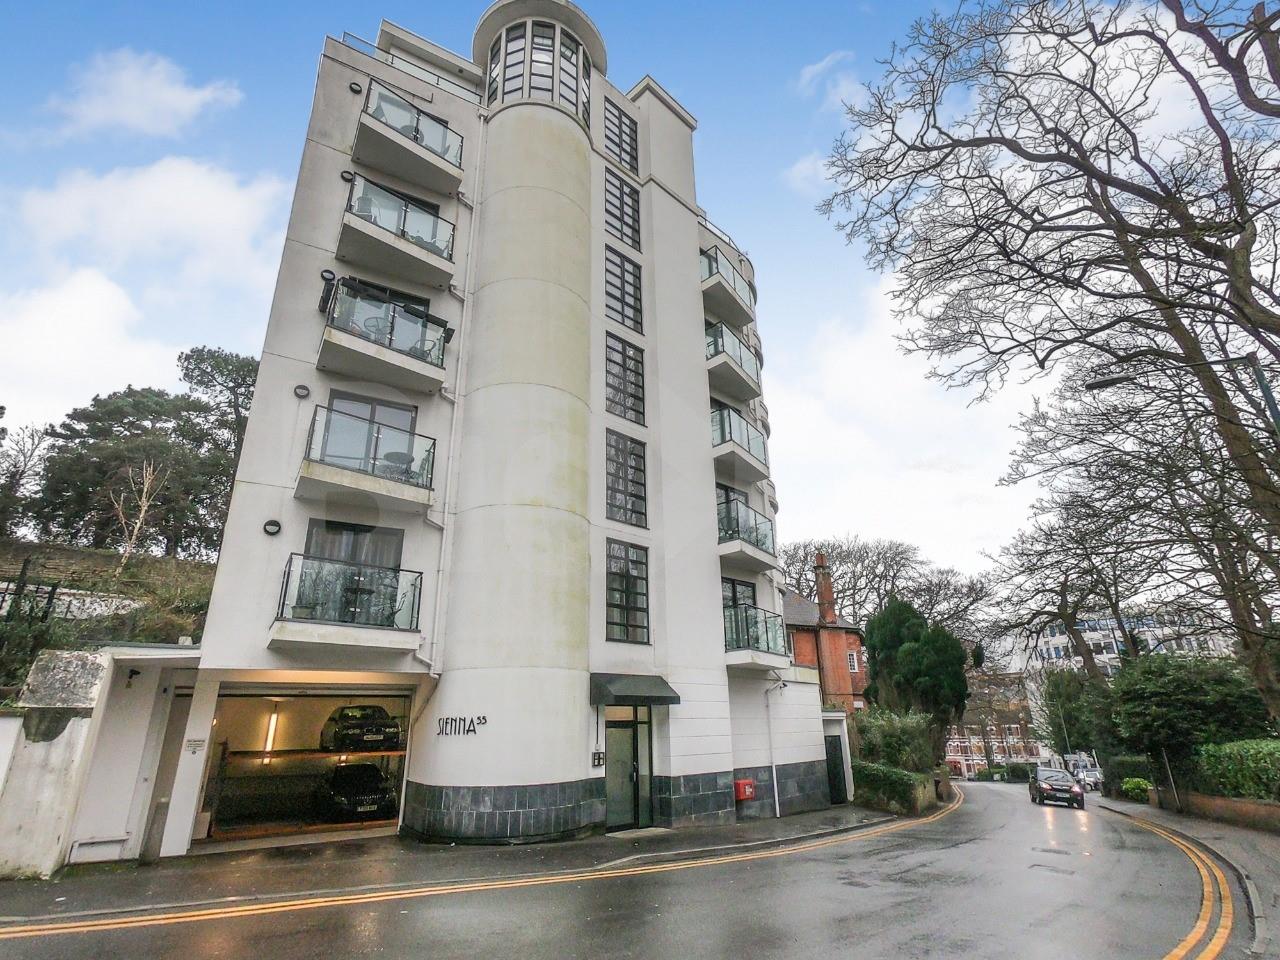 Flat 10 Sienna, 55 St. Peters Road, Bournemouth, BH1 2AG 1/7